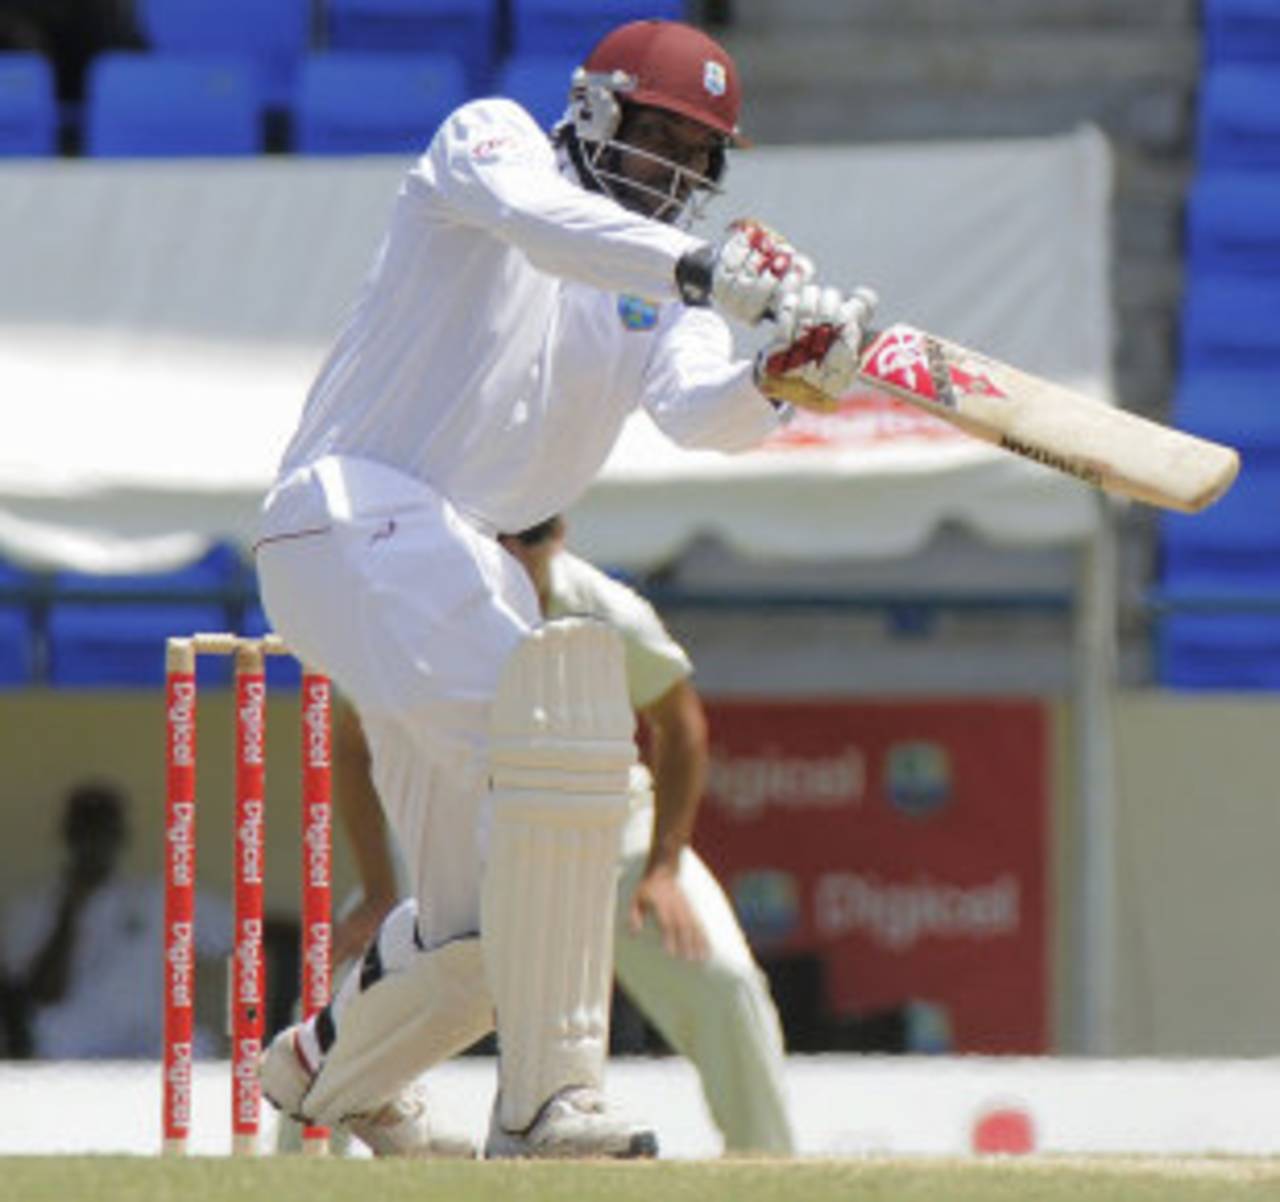 Chris Gayle drives during his unbeaten 85, West Indies v New Zealand, 1st Test, Antigua, 2nd day, July 26, 2012